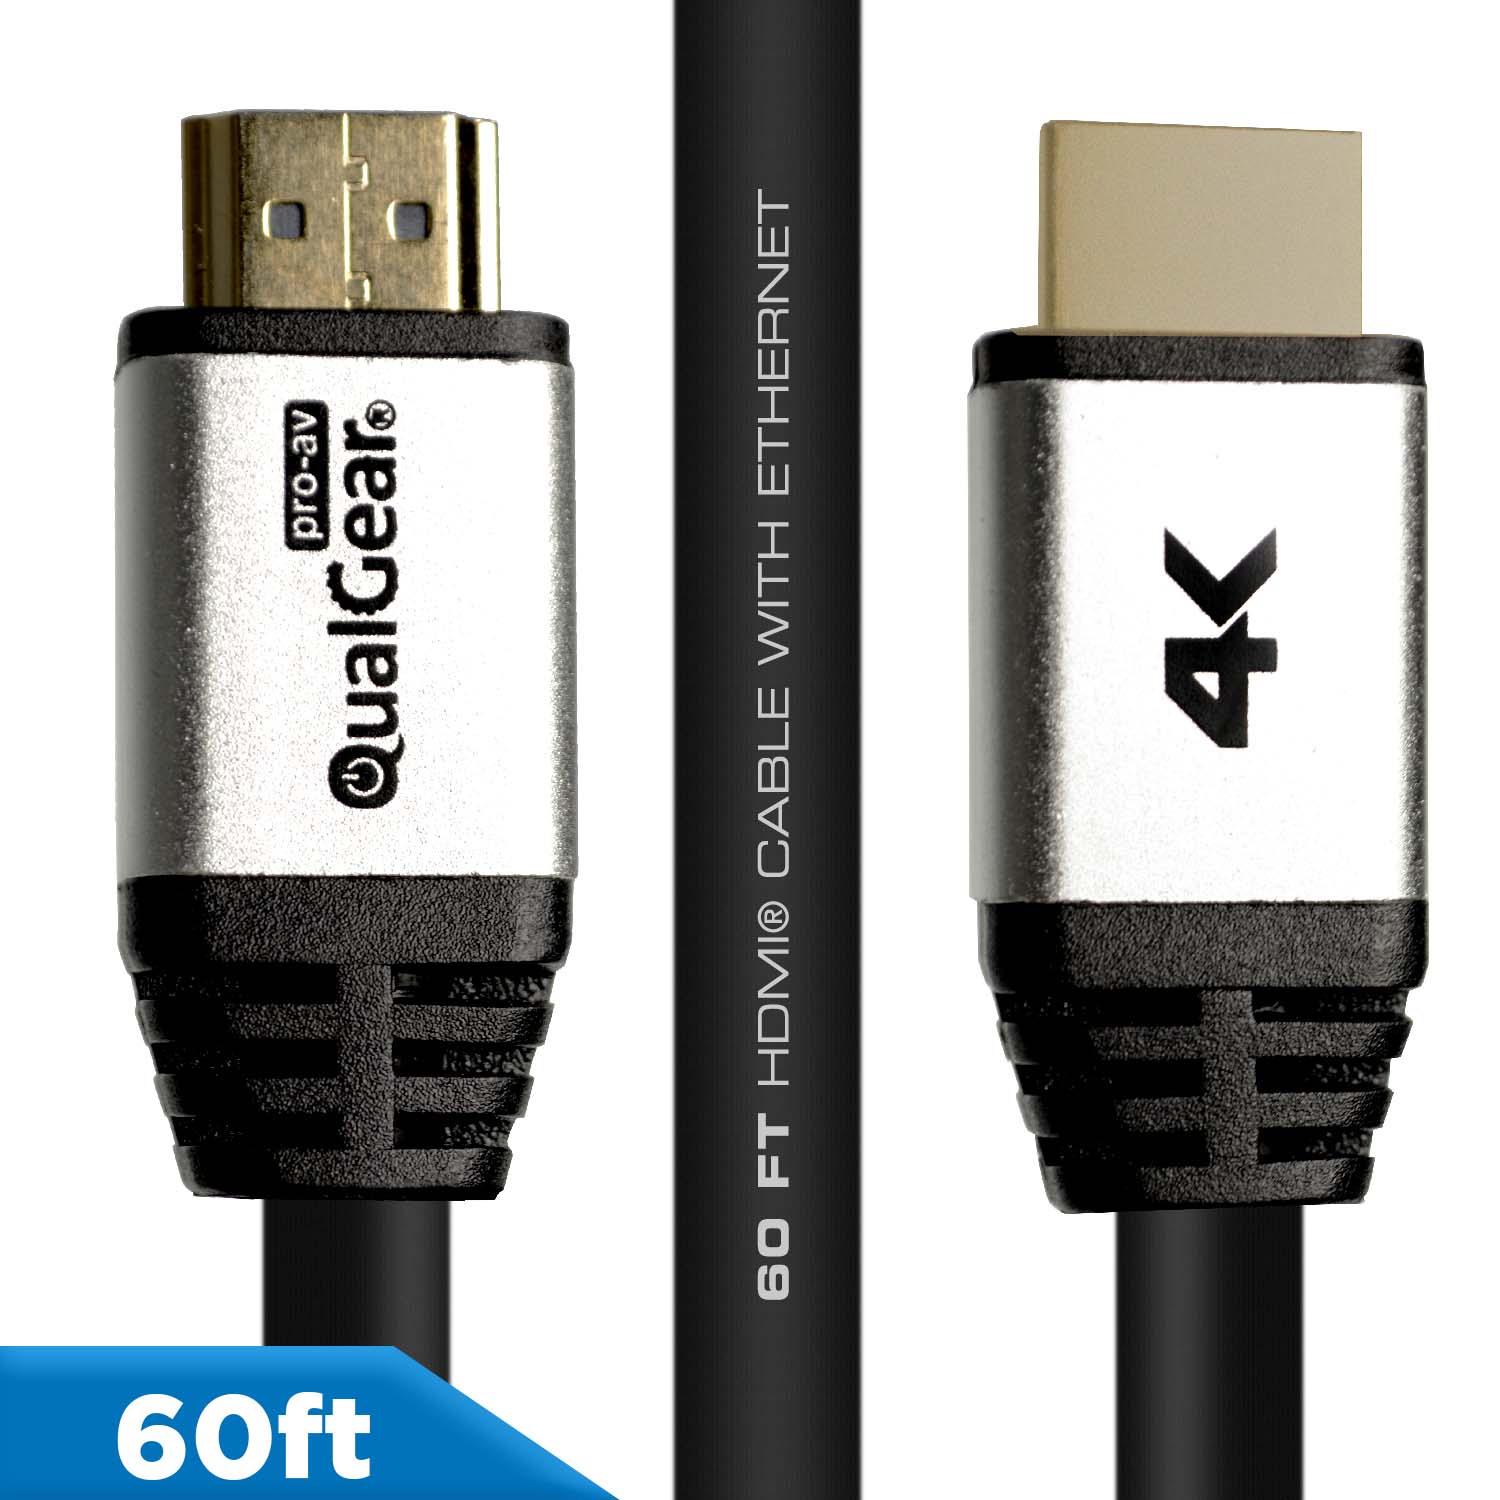 QualGear 60 Ft High-Speed Long HDMI 2.0 Cable with 24K Gold Plated Contacts, Supports 4K Ultra HD, 3D, 18 Gbps, Audio Return Channel,CL3 Rated for In-Wall Use (QG-CBL-HD20-60FT)